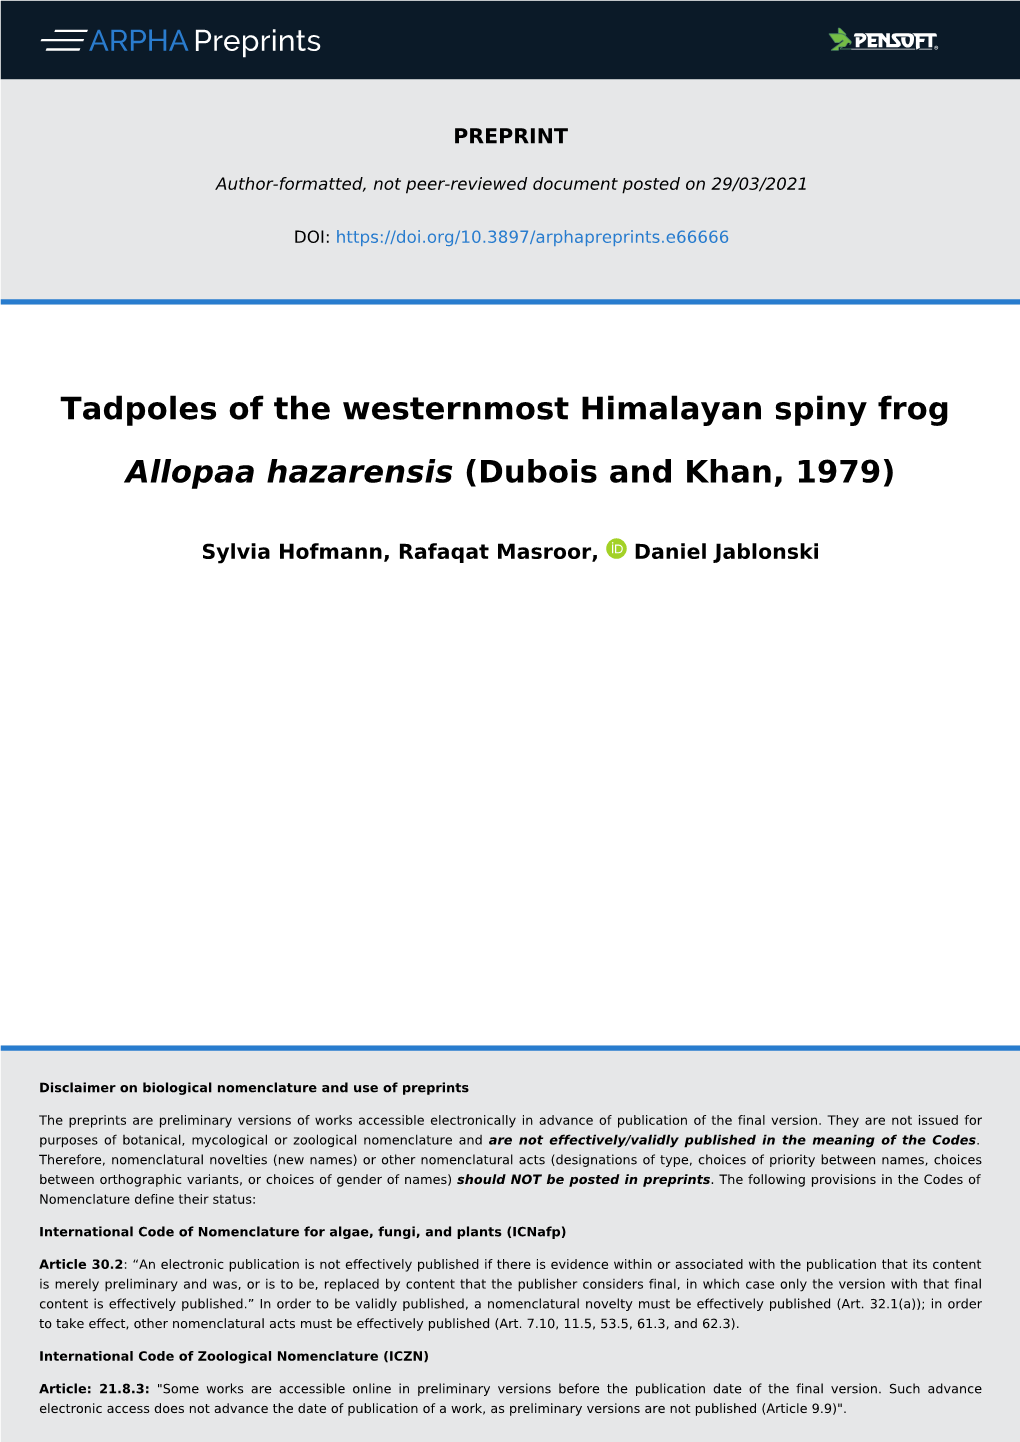 Tadpoles of the Westernmost Himalayan Spiny Frog Allopaa